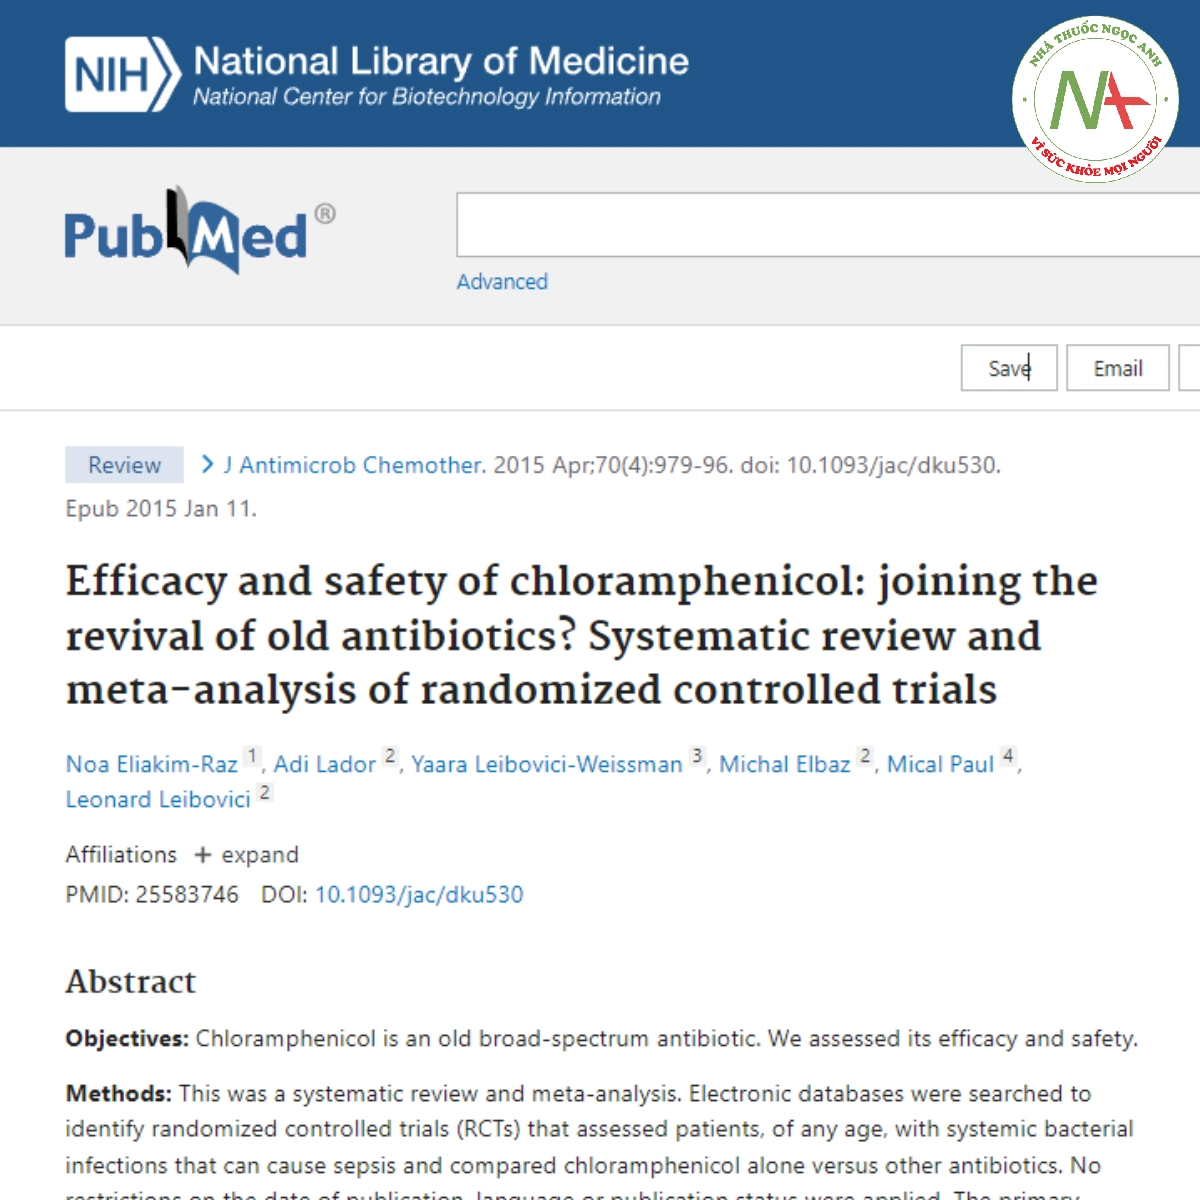 Efficacy and safety of chloramphenicol: joining the revival of old antibiotics? Systematic review and meta-analysis of randomized controlled trials